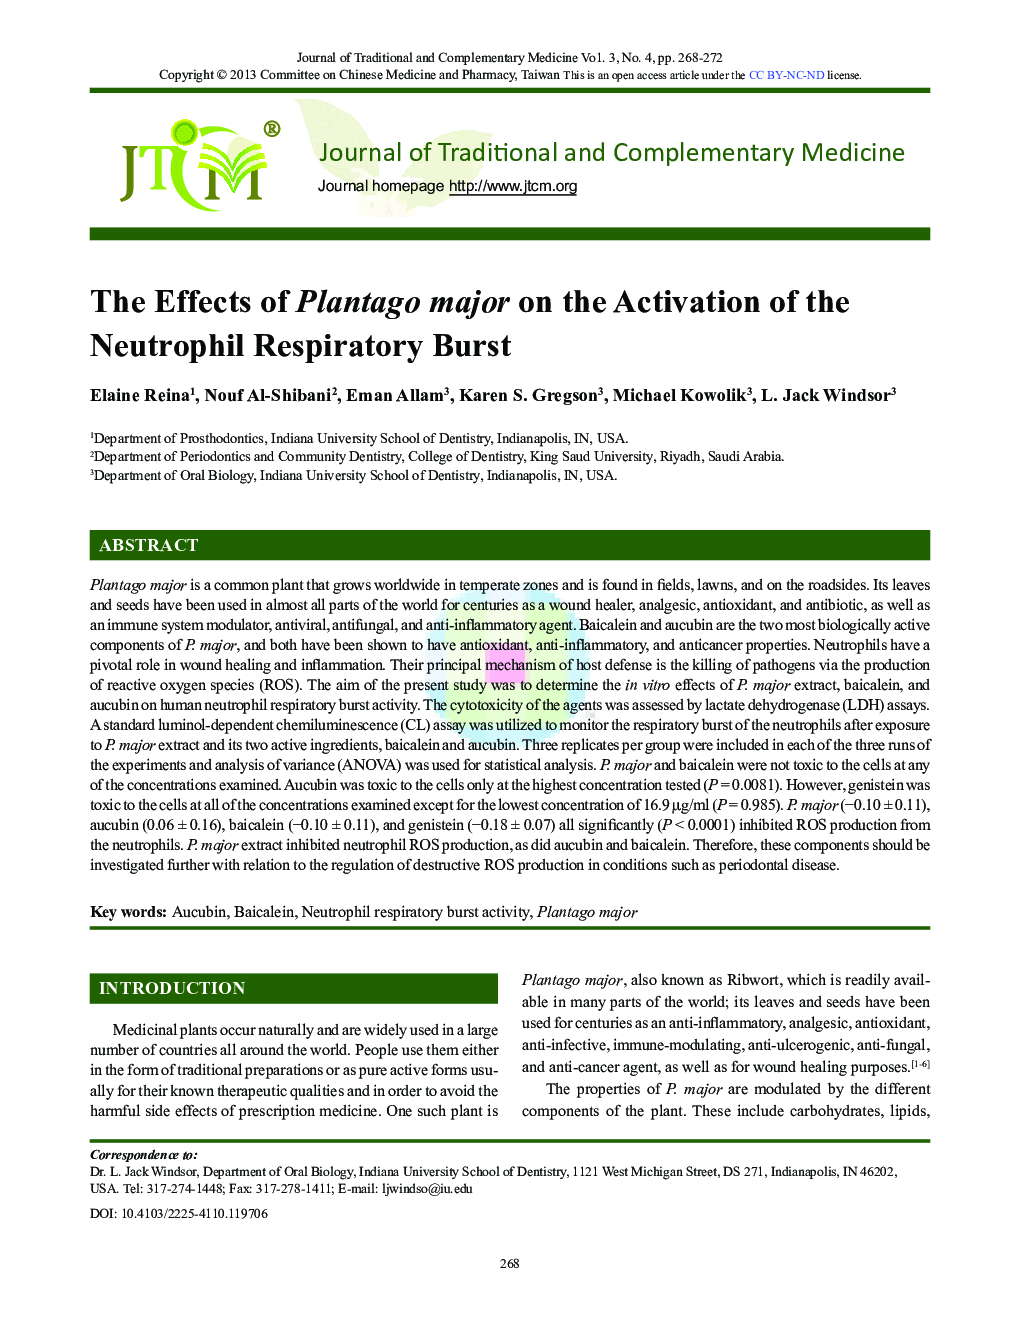 The Effects of Plantago major on the Activation of the Neutrophil Respiratory Burst